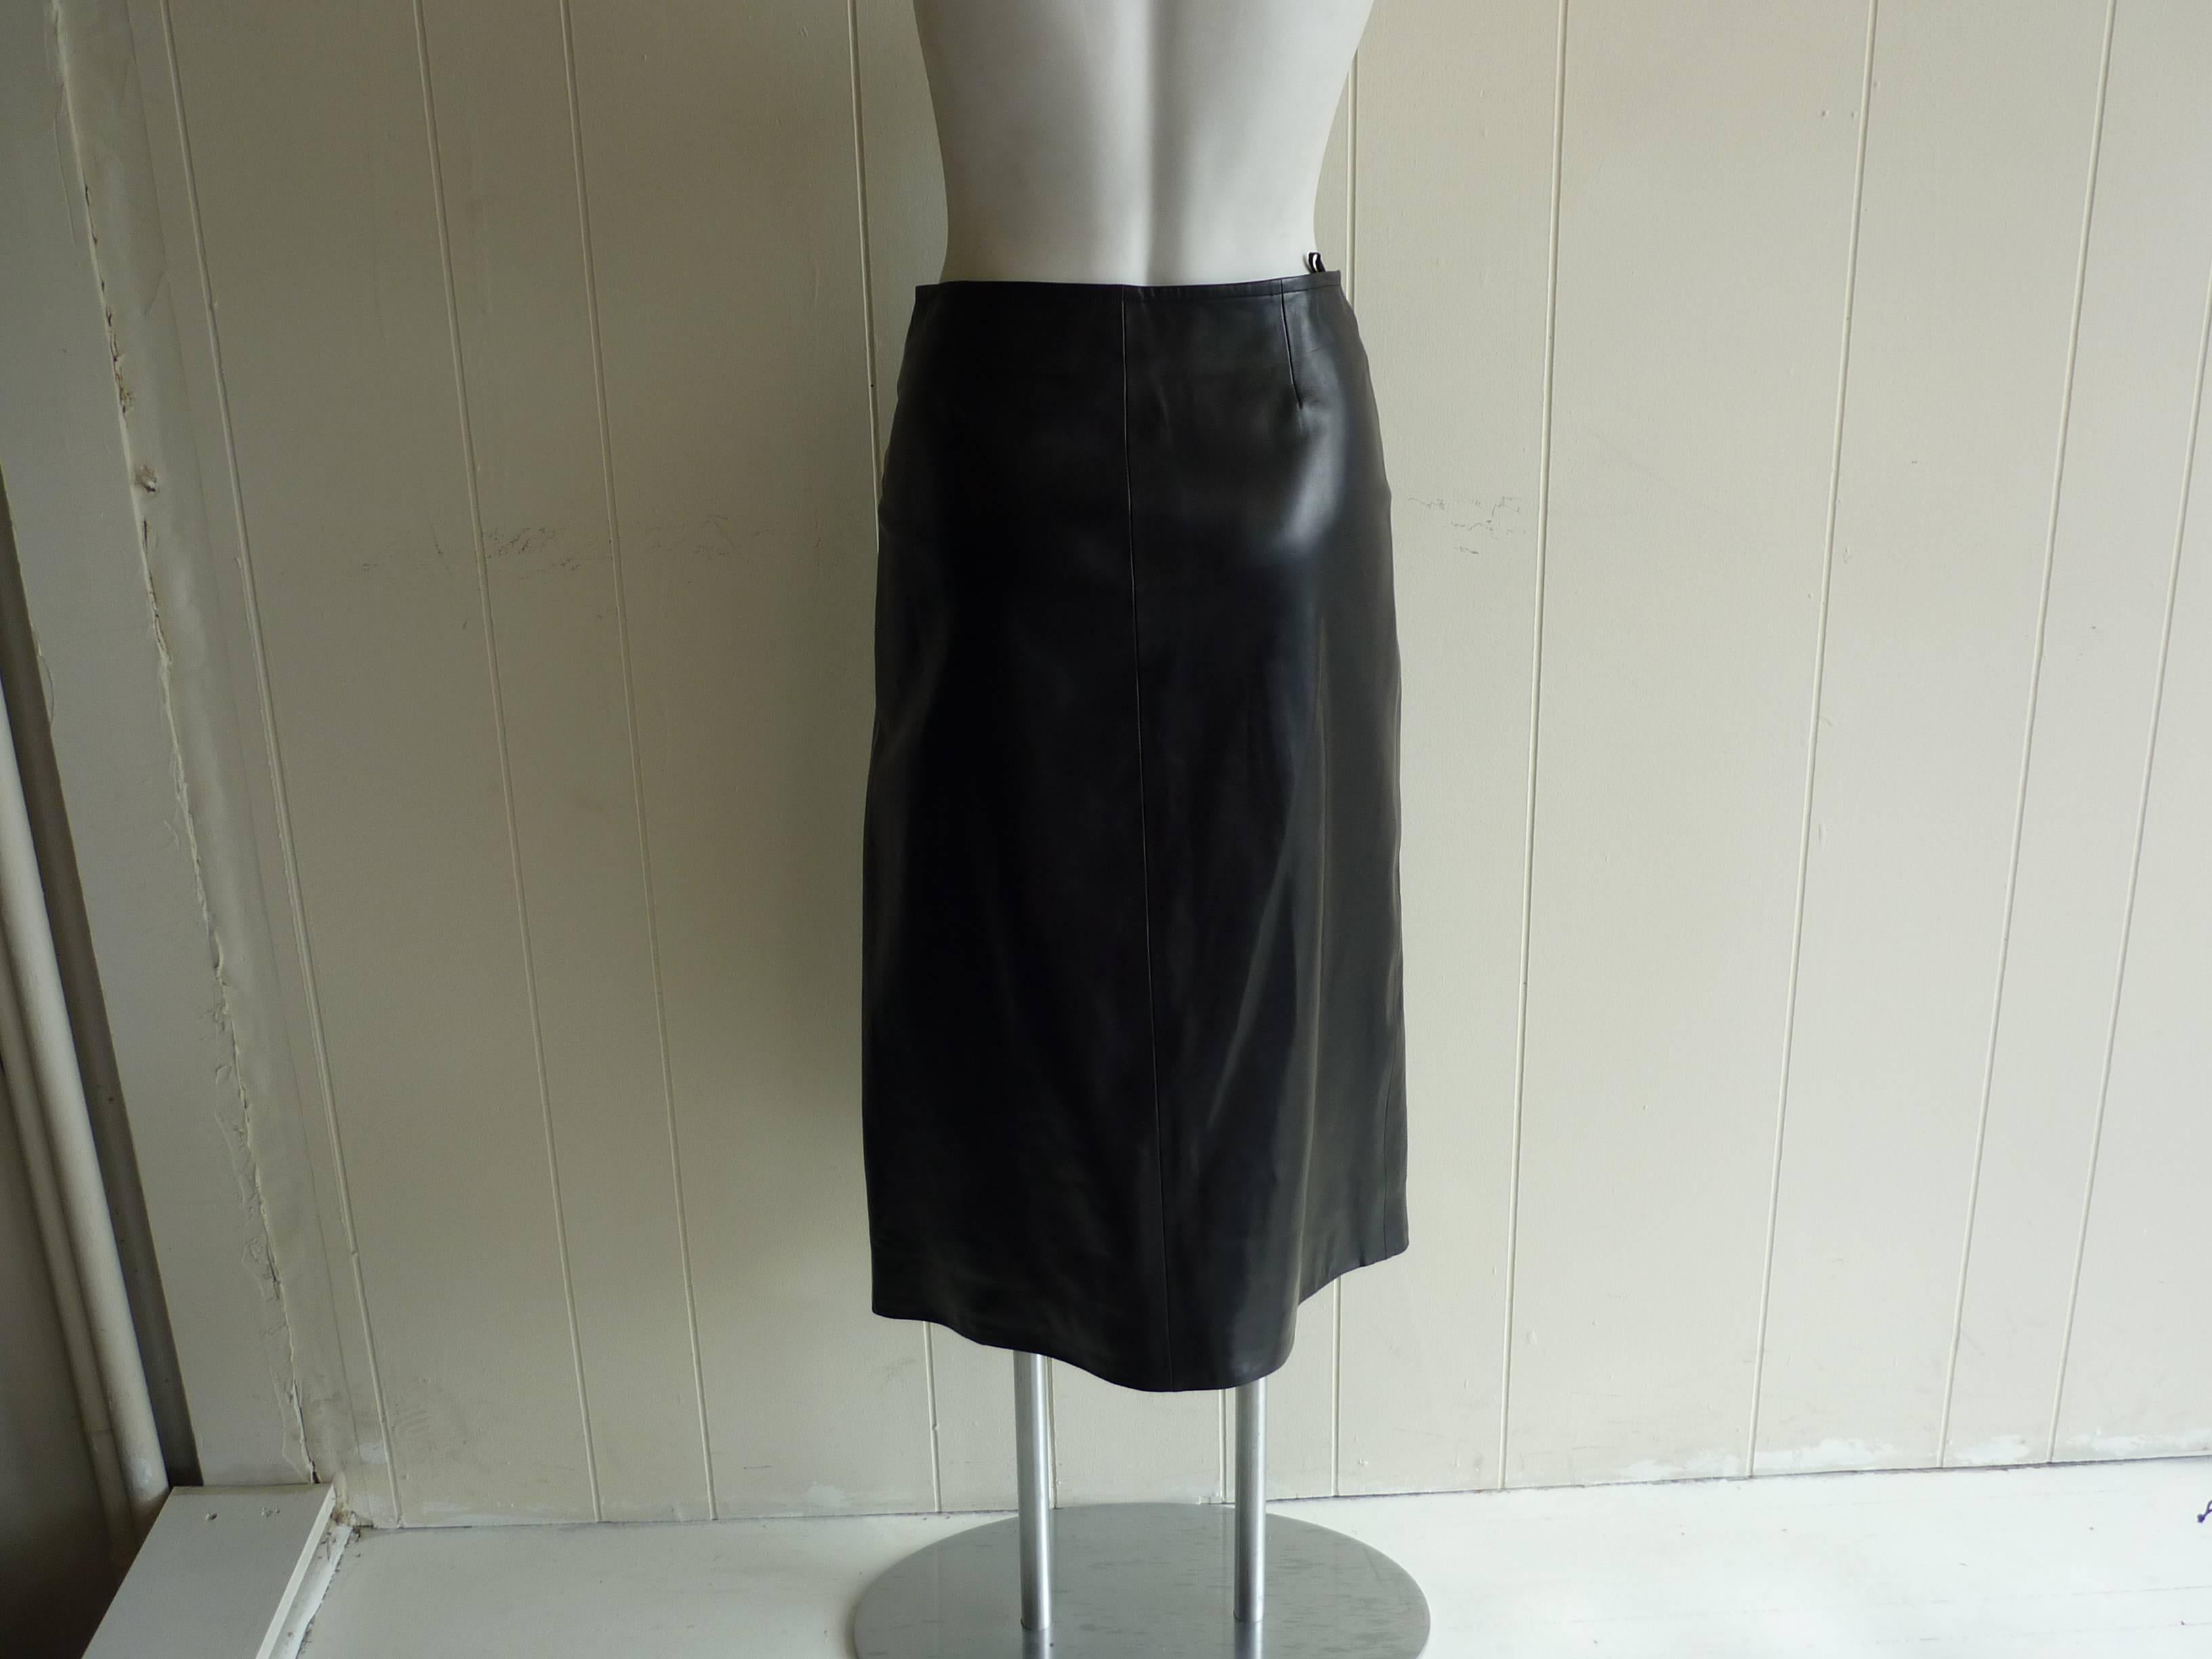 This butter soft lambskin wrap skirt has wonderful silver hardware fastening incised with the Celine logo.

The fit is slightly assymetrical, allowing the leg to peep out at the bottom.

This skirt was never worn.